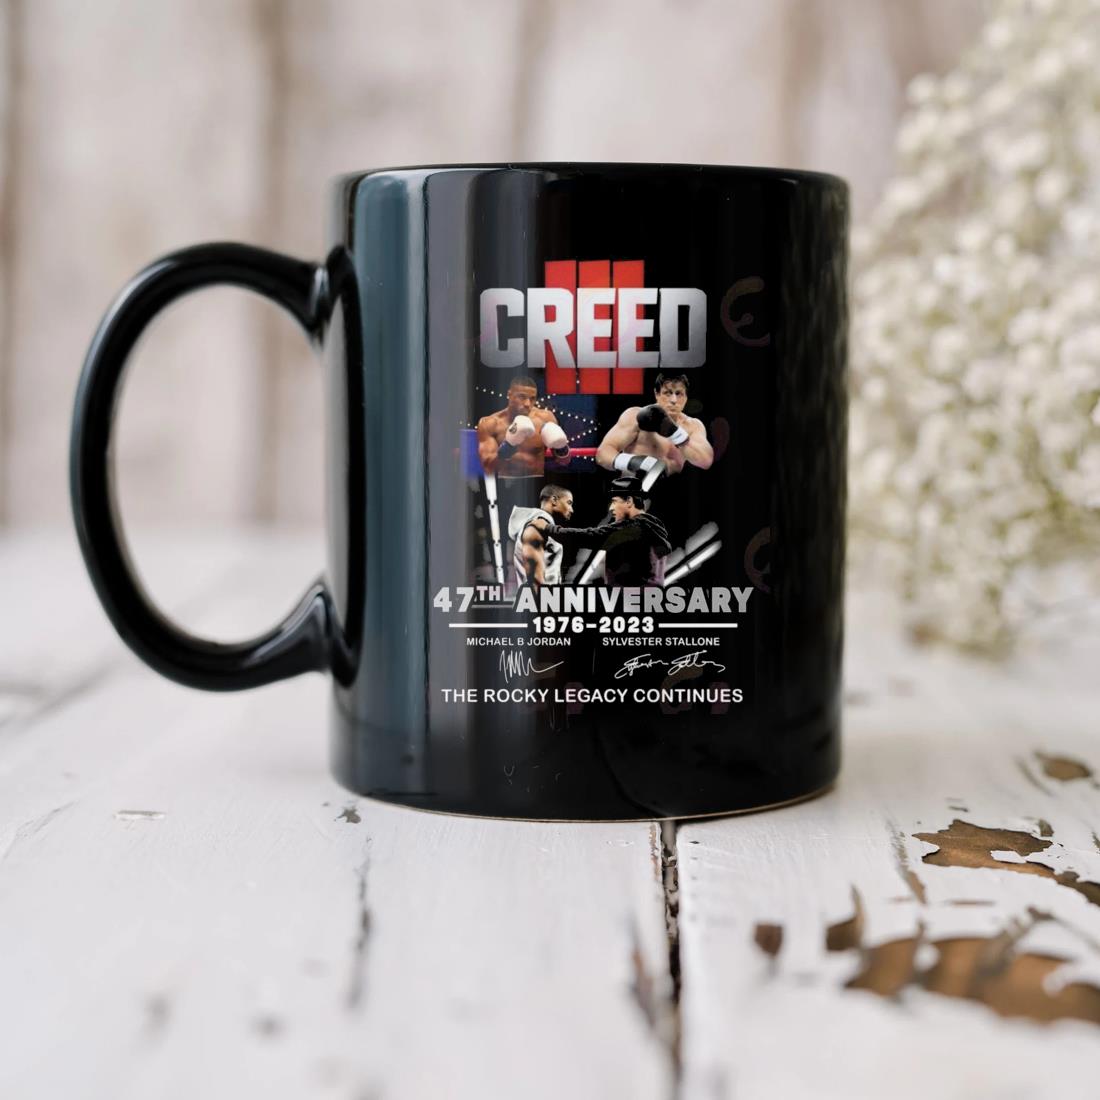 Creed 47th Anniversary 1976 – 2023 The Rocky Legacy Continues Signatures Mug